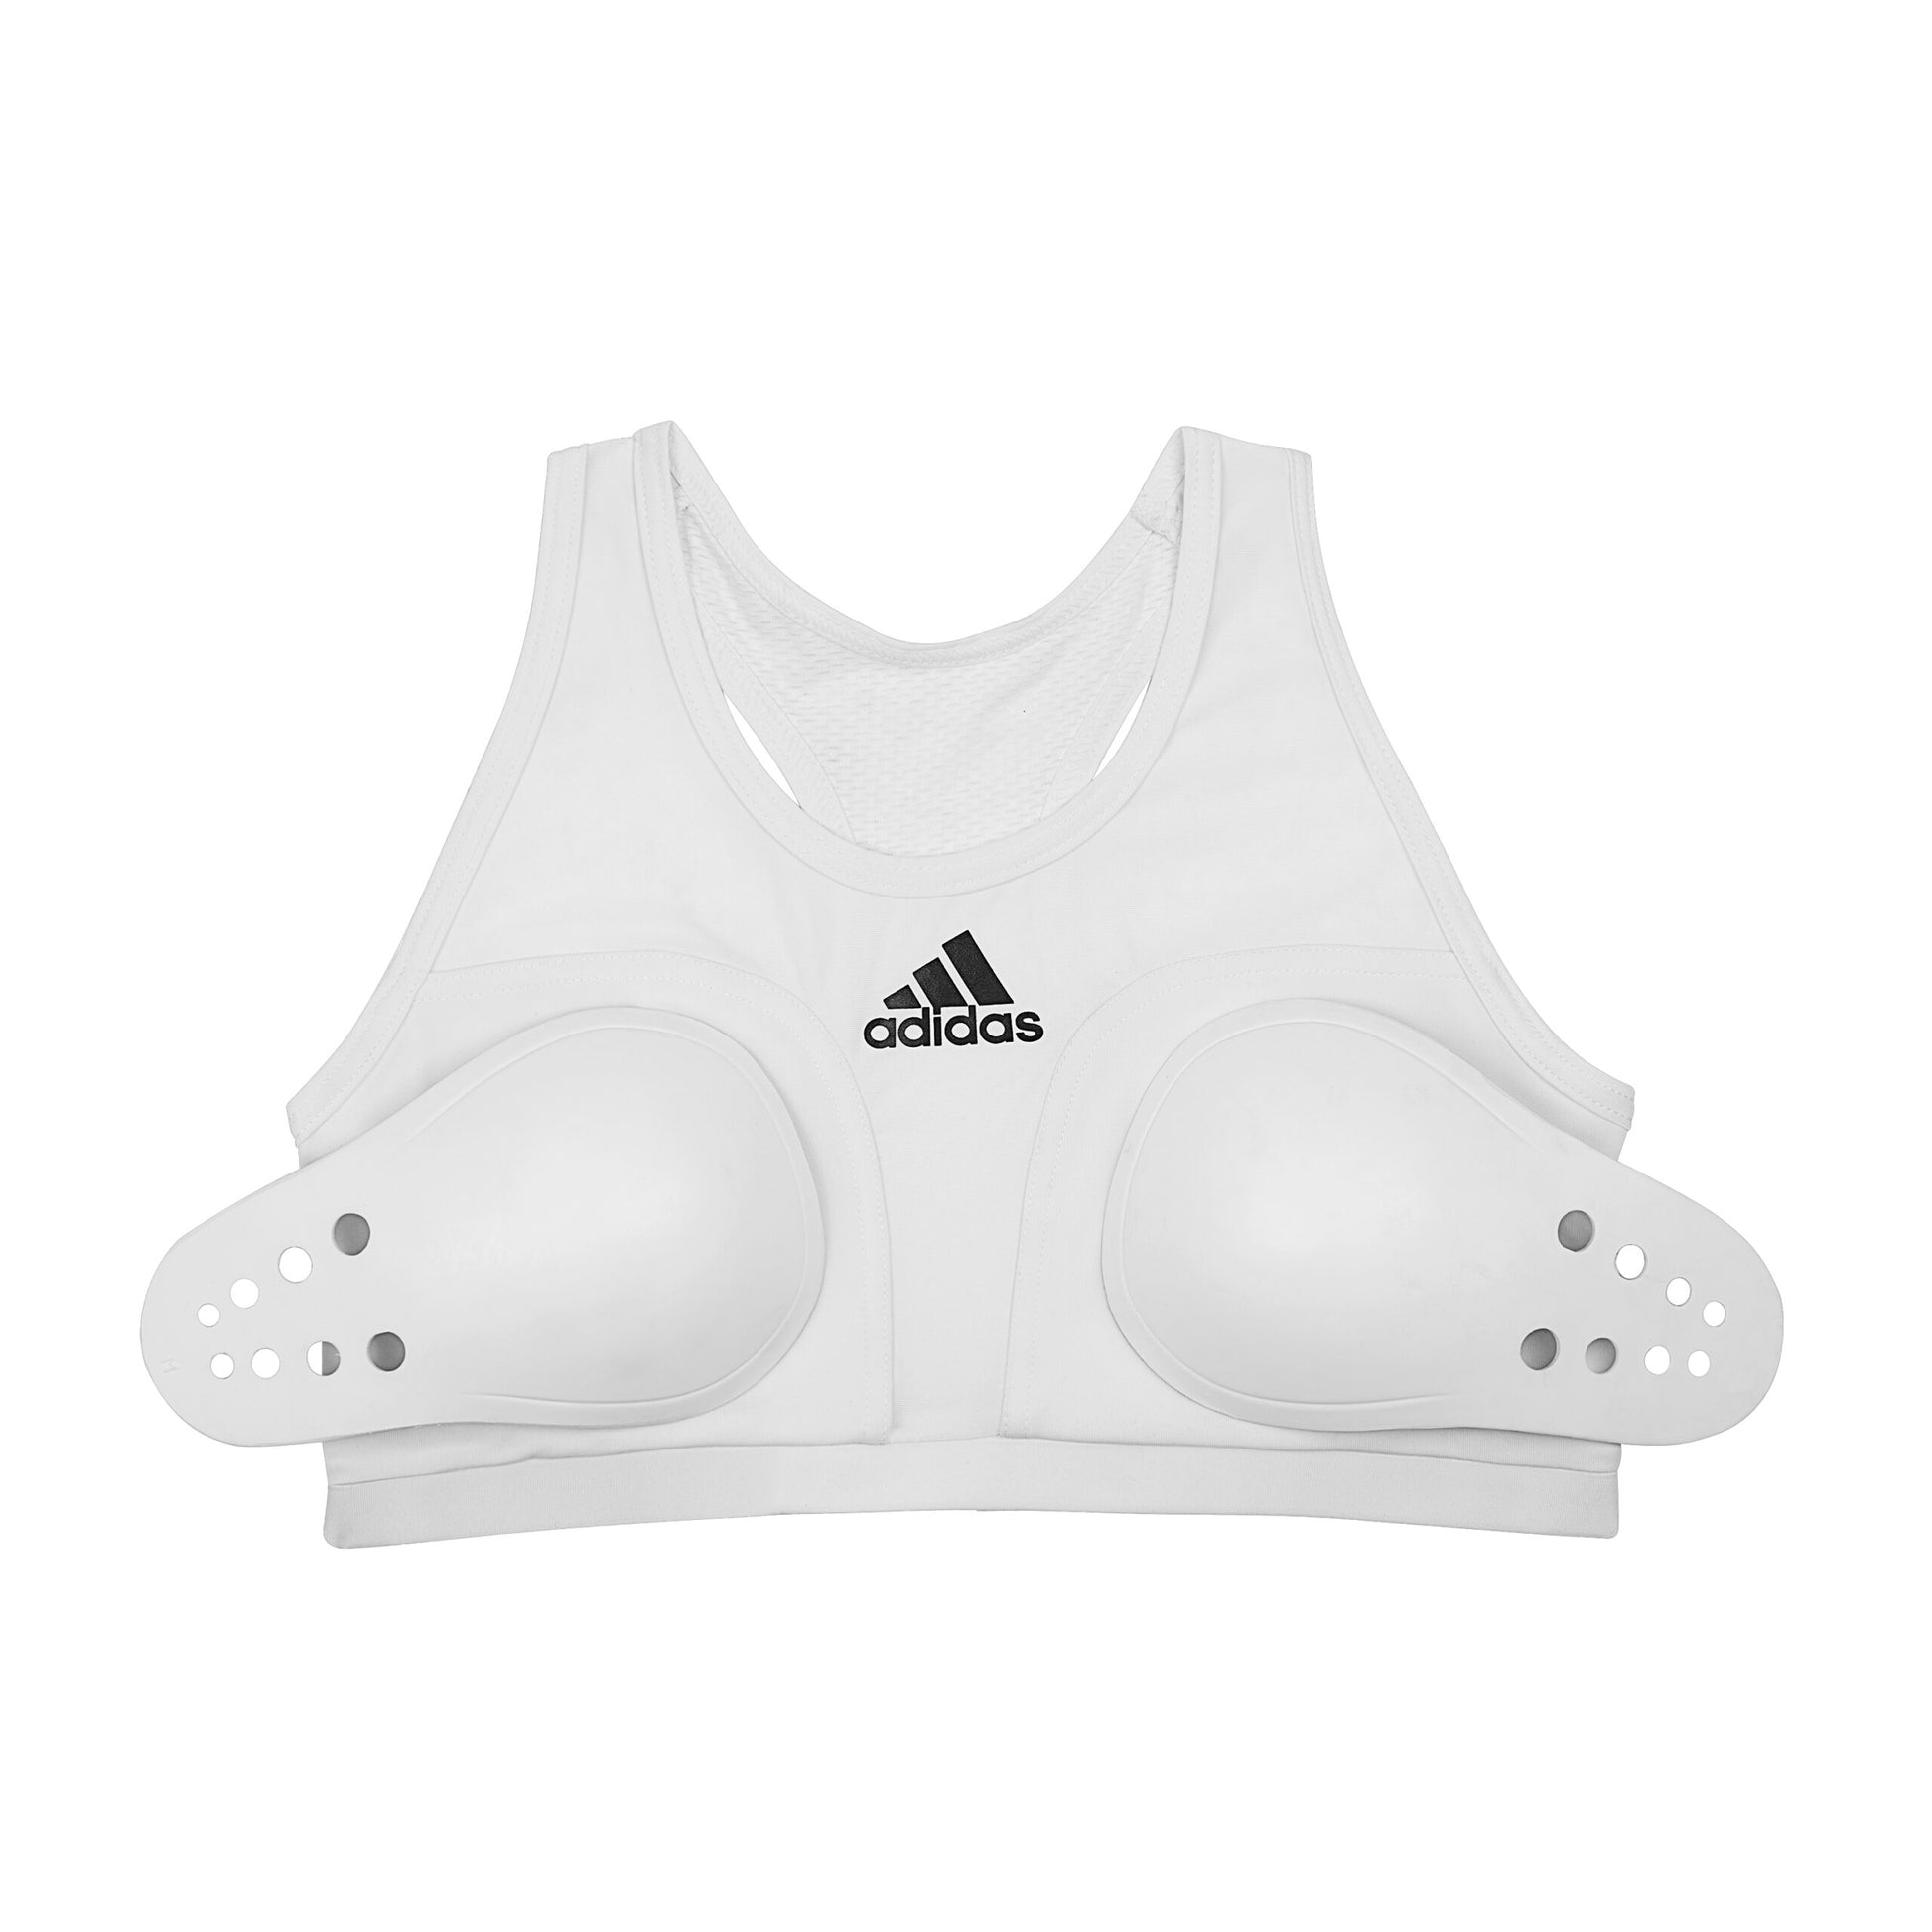 Adibp12 Adidas Wkf Approved Female Breast Protector White 05